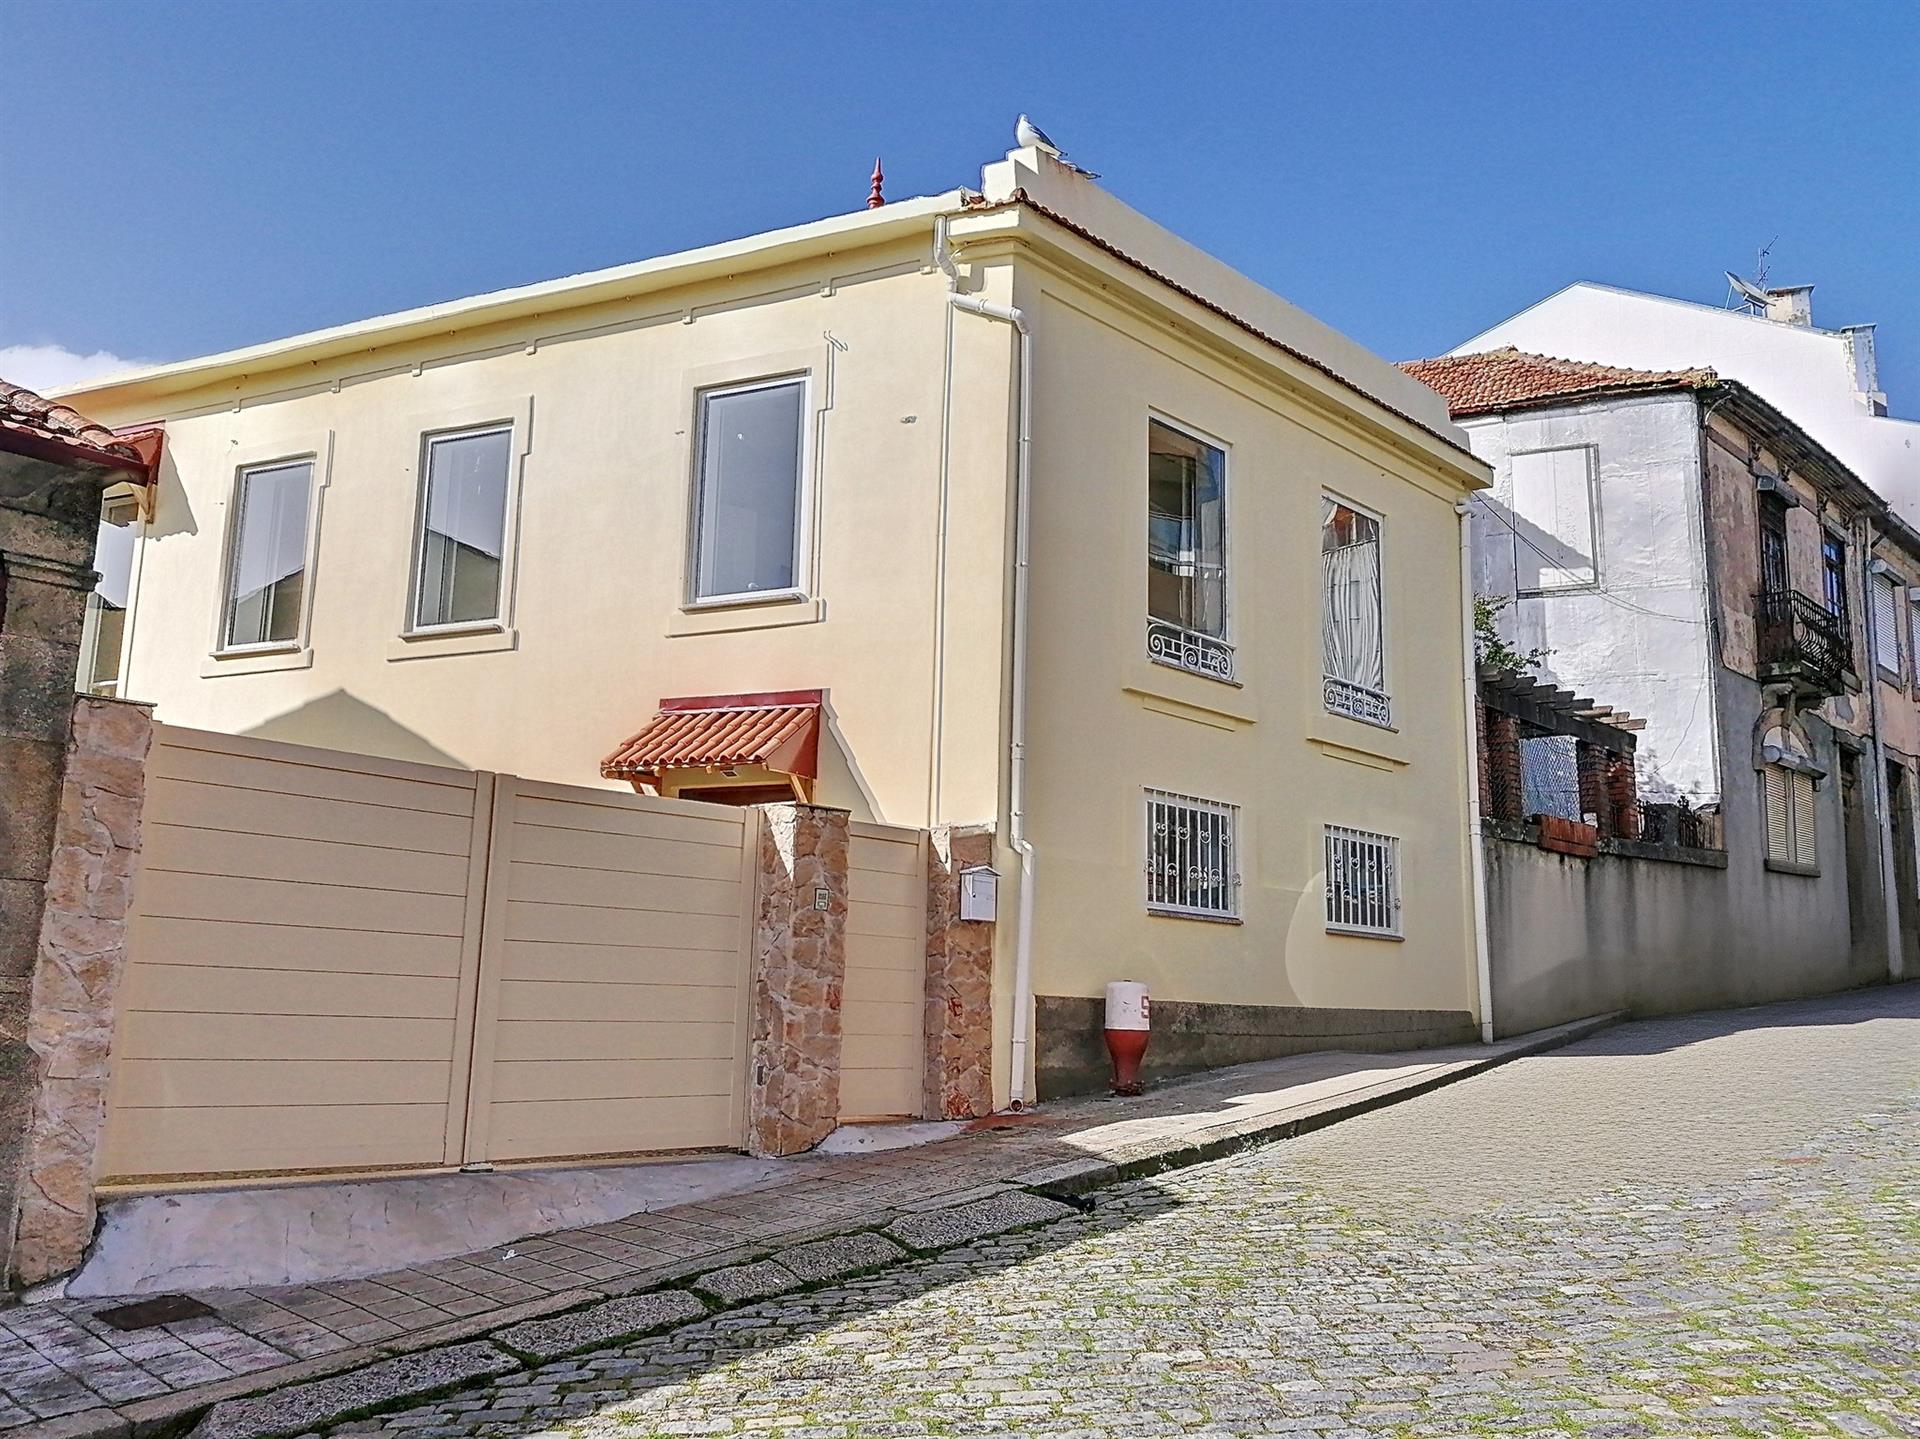 Fully rehabilitated 5 bedroom two-family house in Campanhã, near Dragão